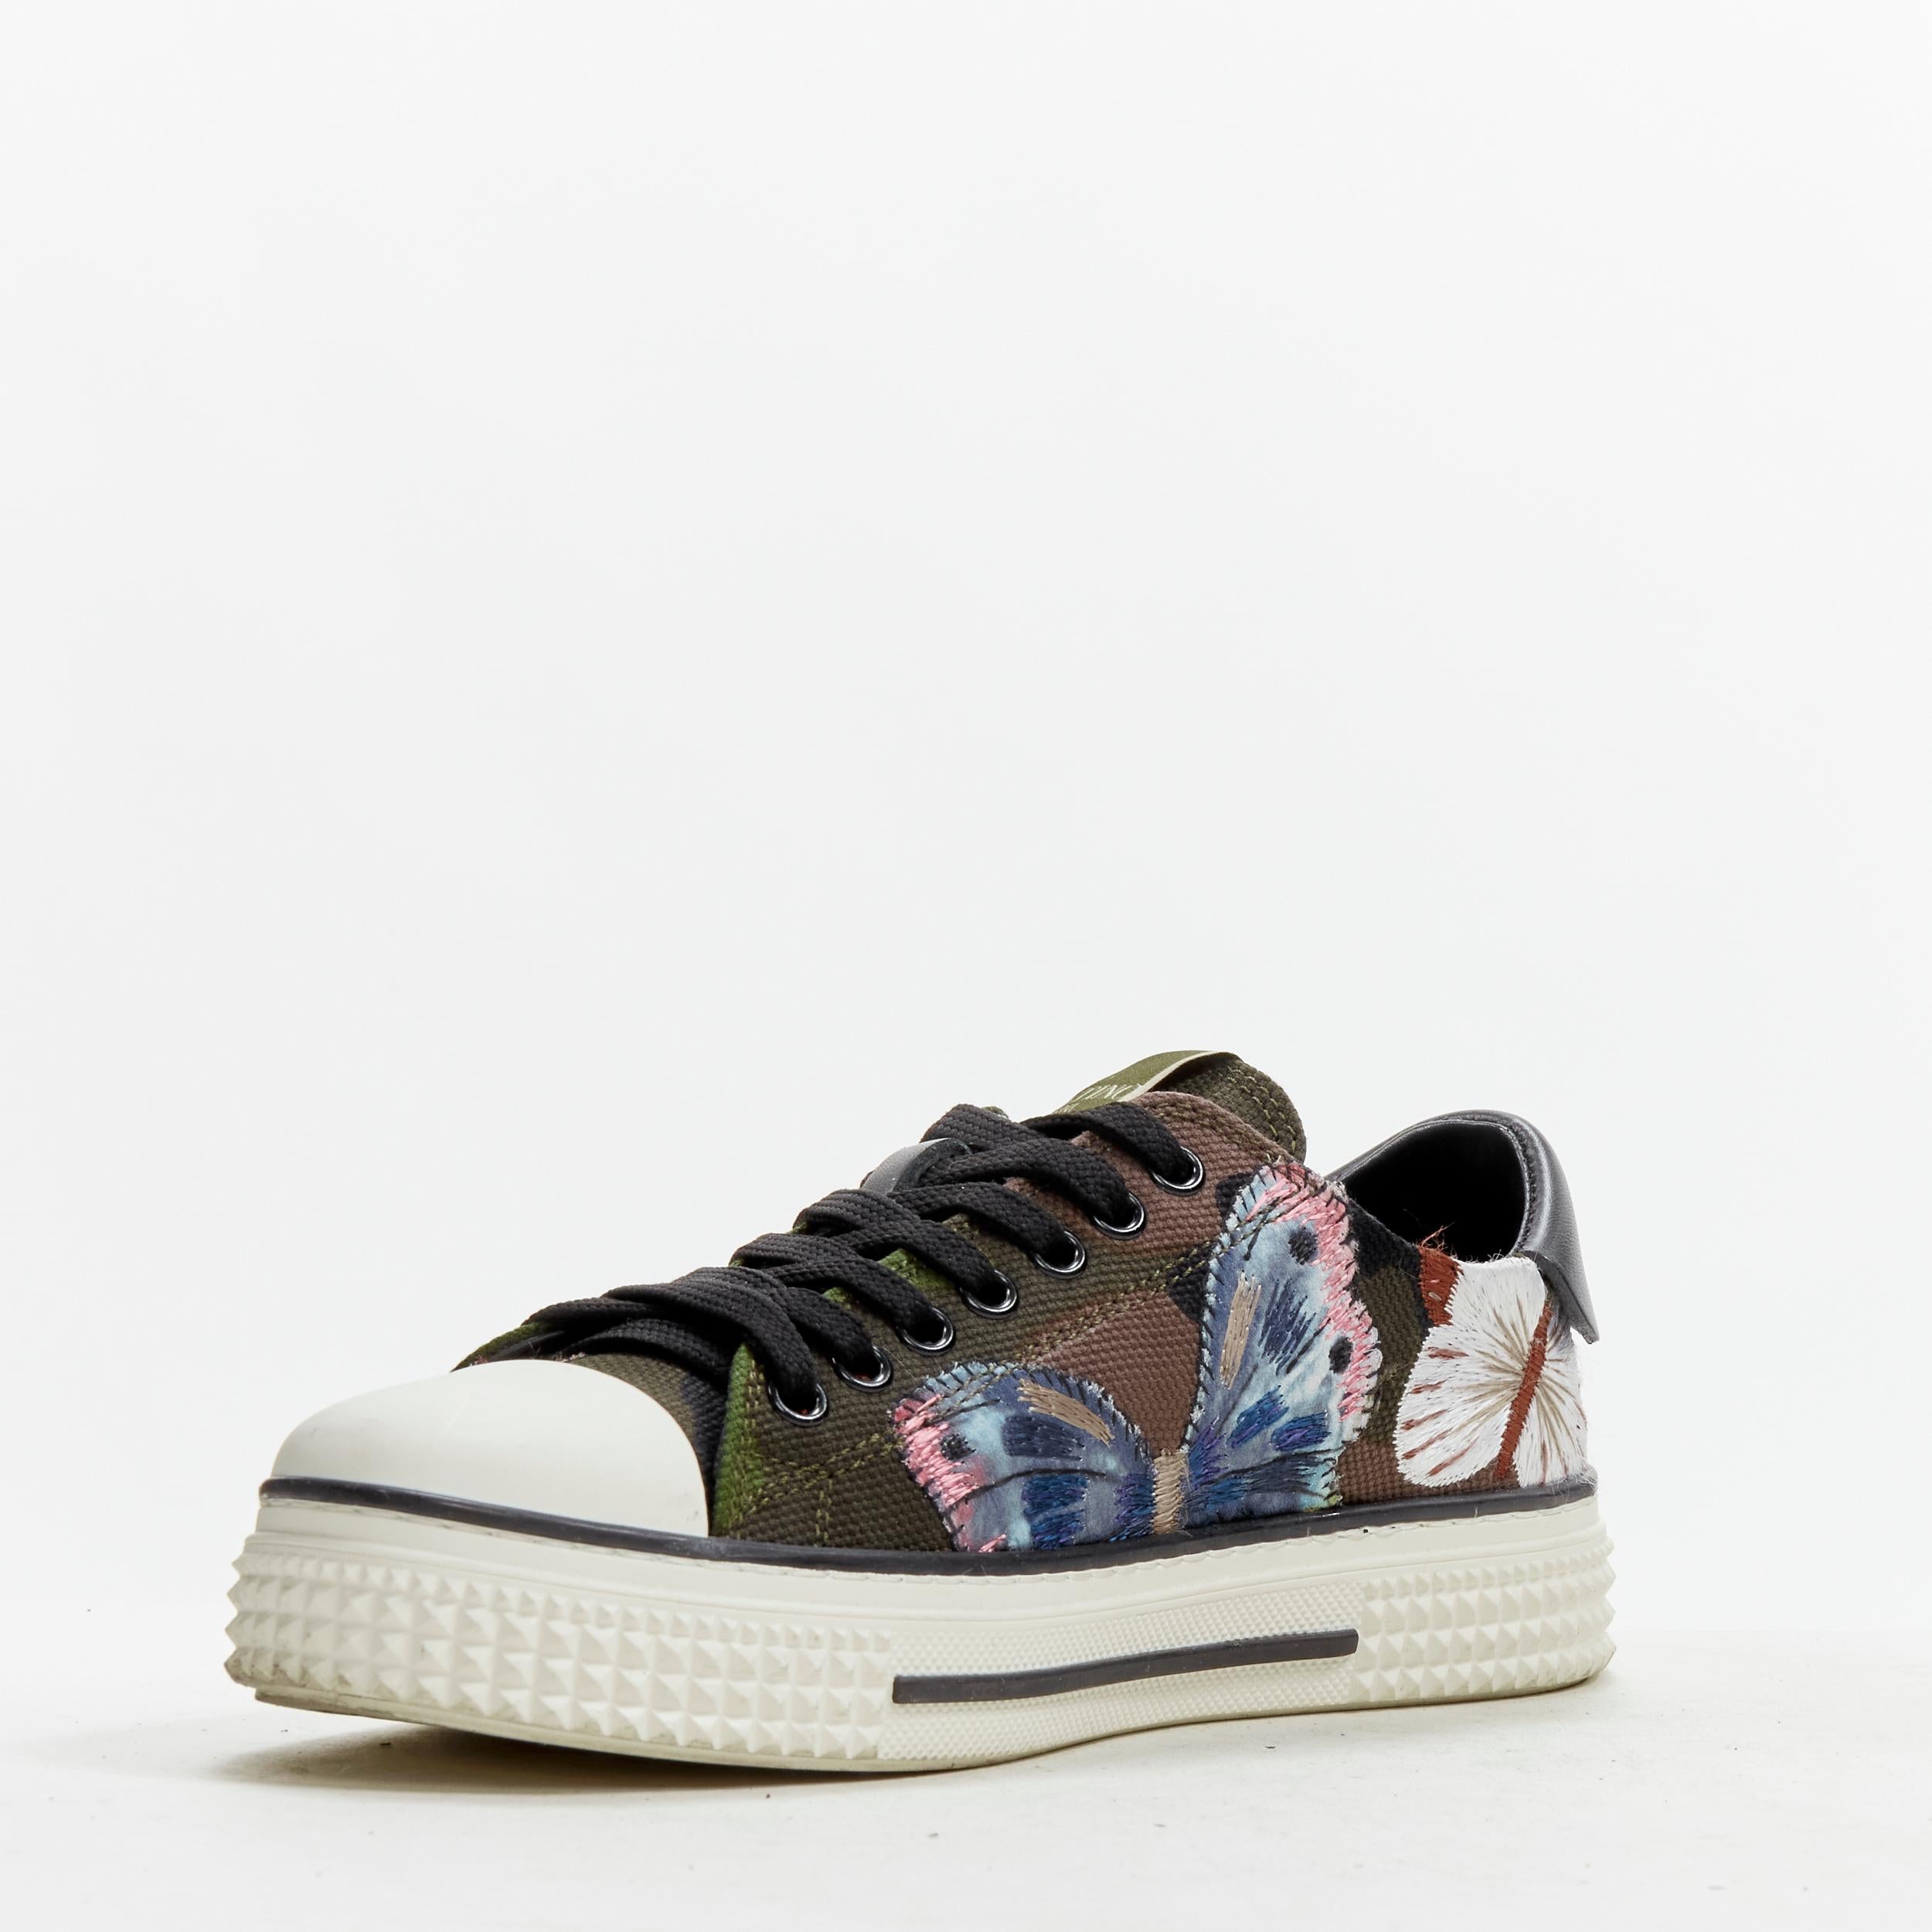 VALENTINO Butterfly embroidery green camouflage low top sneaker EU36 1